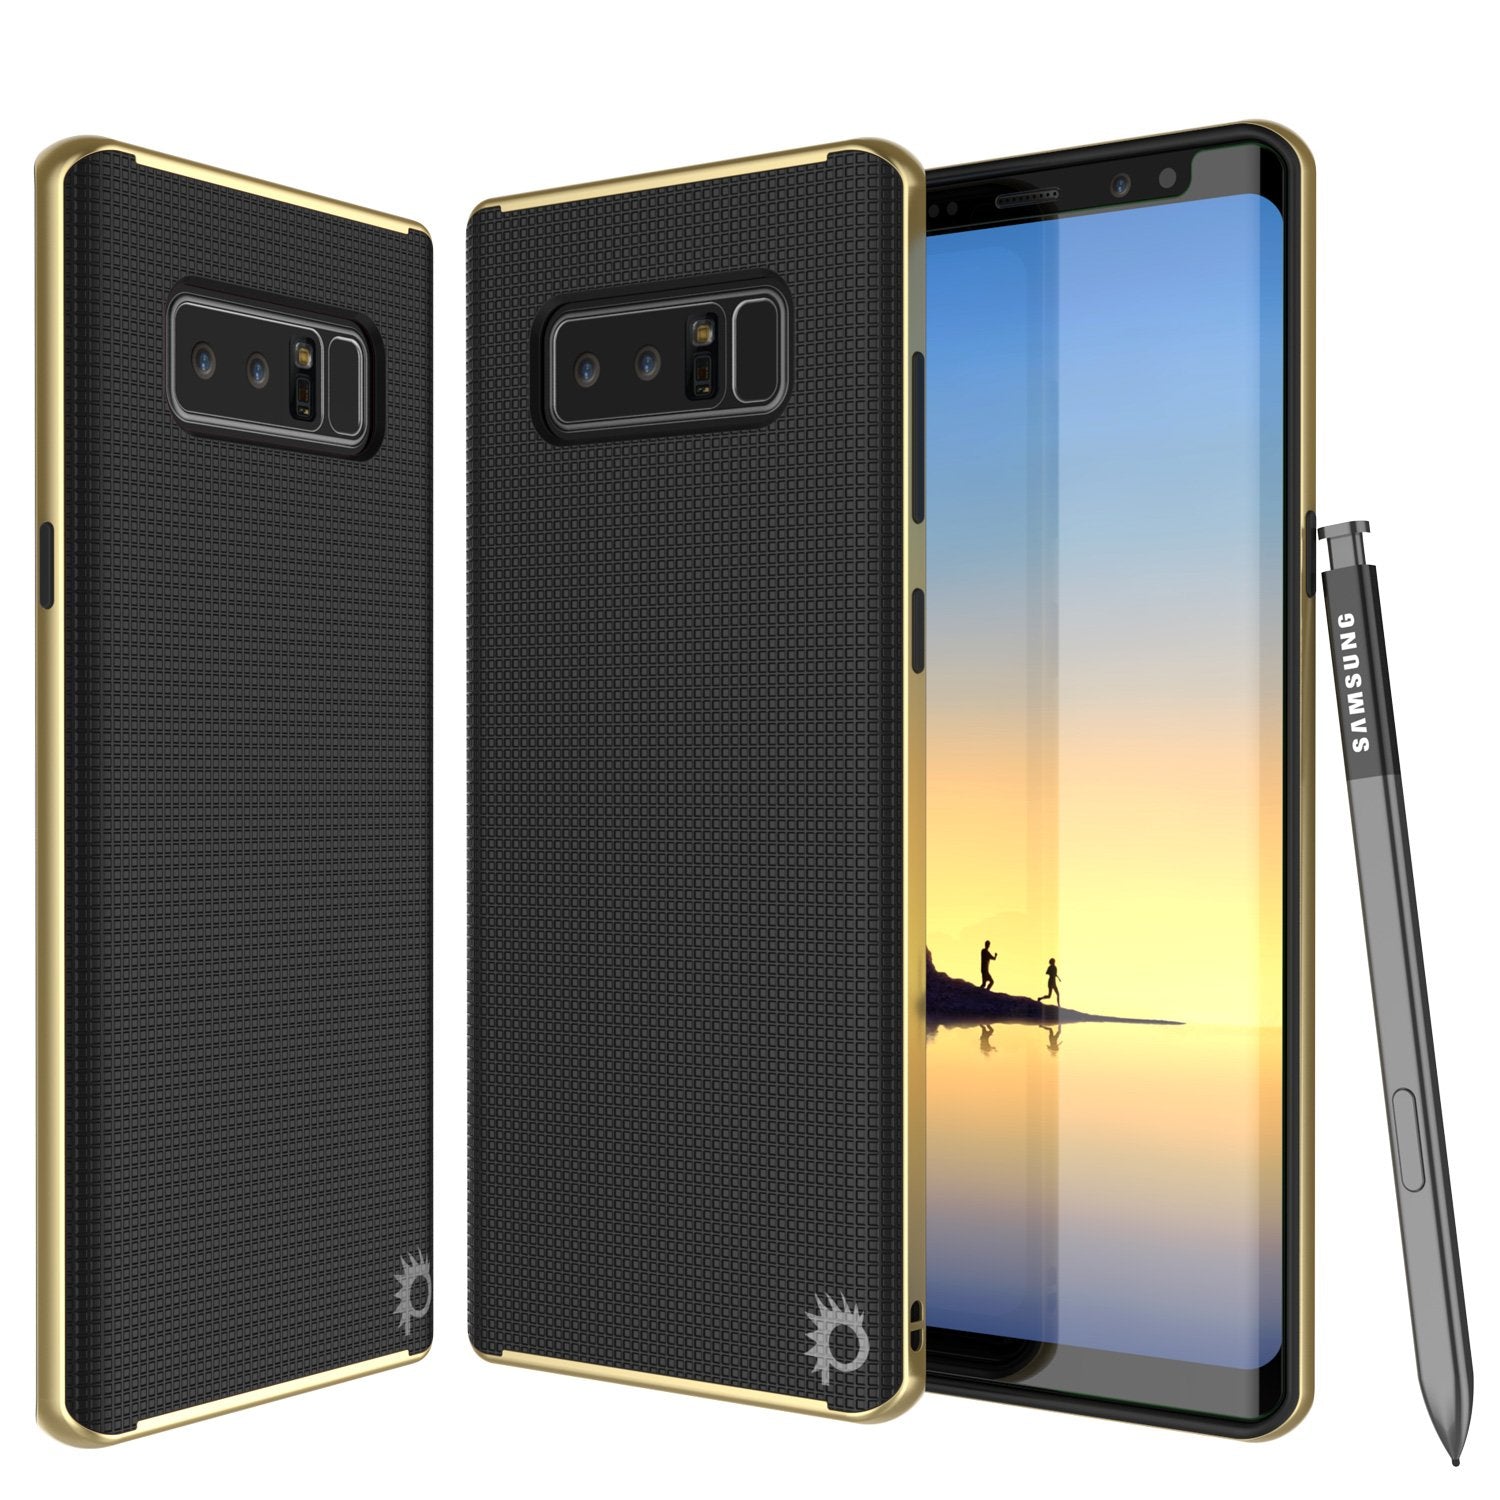 Galaxy Note 8 Case, PunkCase [Stealth Series] Hybrid 3-Piece Shockproof Dual Layer Cover [Non-Slip] [Soft TPU + PC Bumper] with PUNKSHIELD Screen Protector for Samsung Note 8 [Gold] - PunkCase NZ